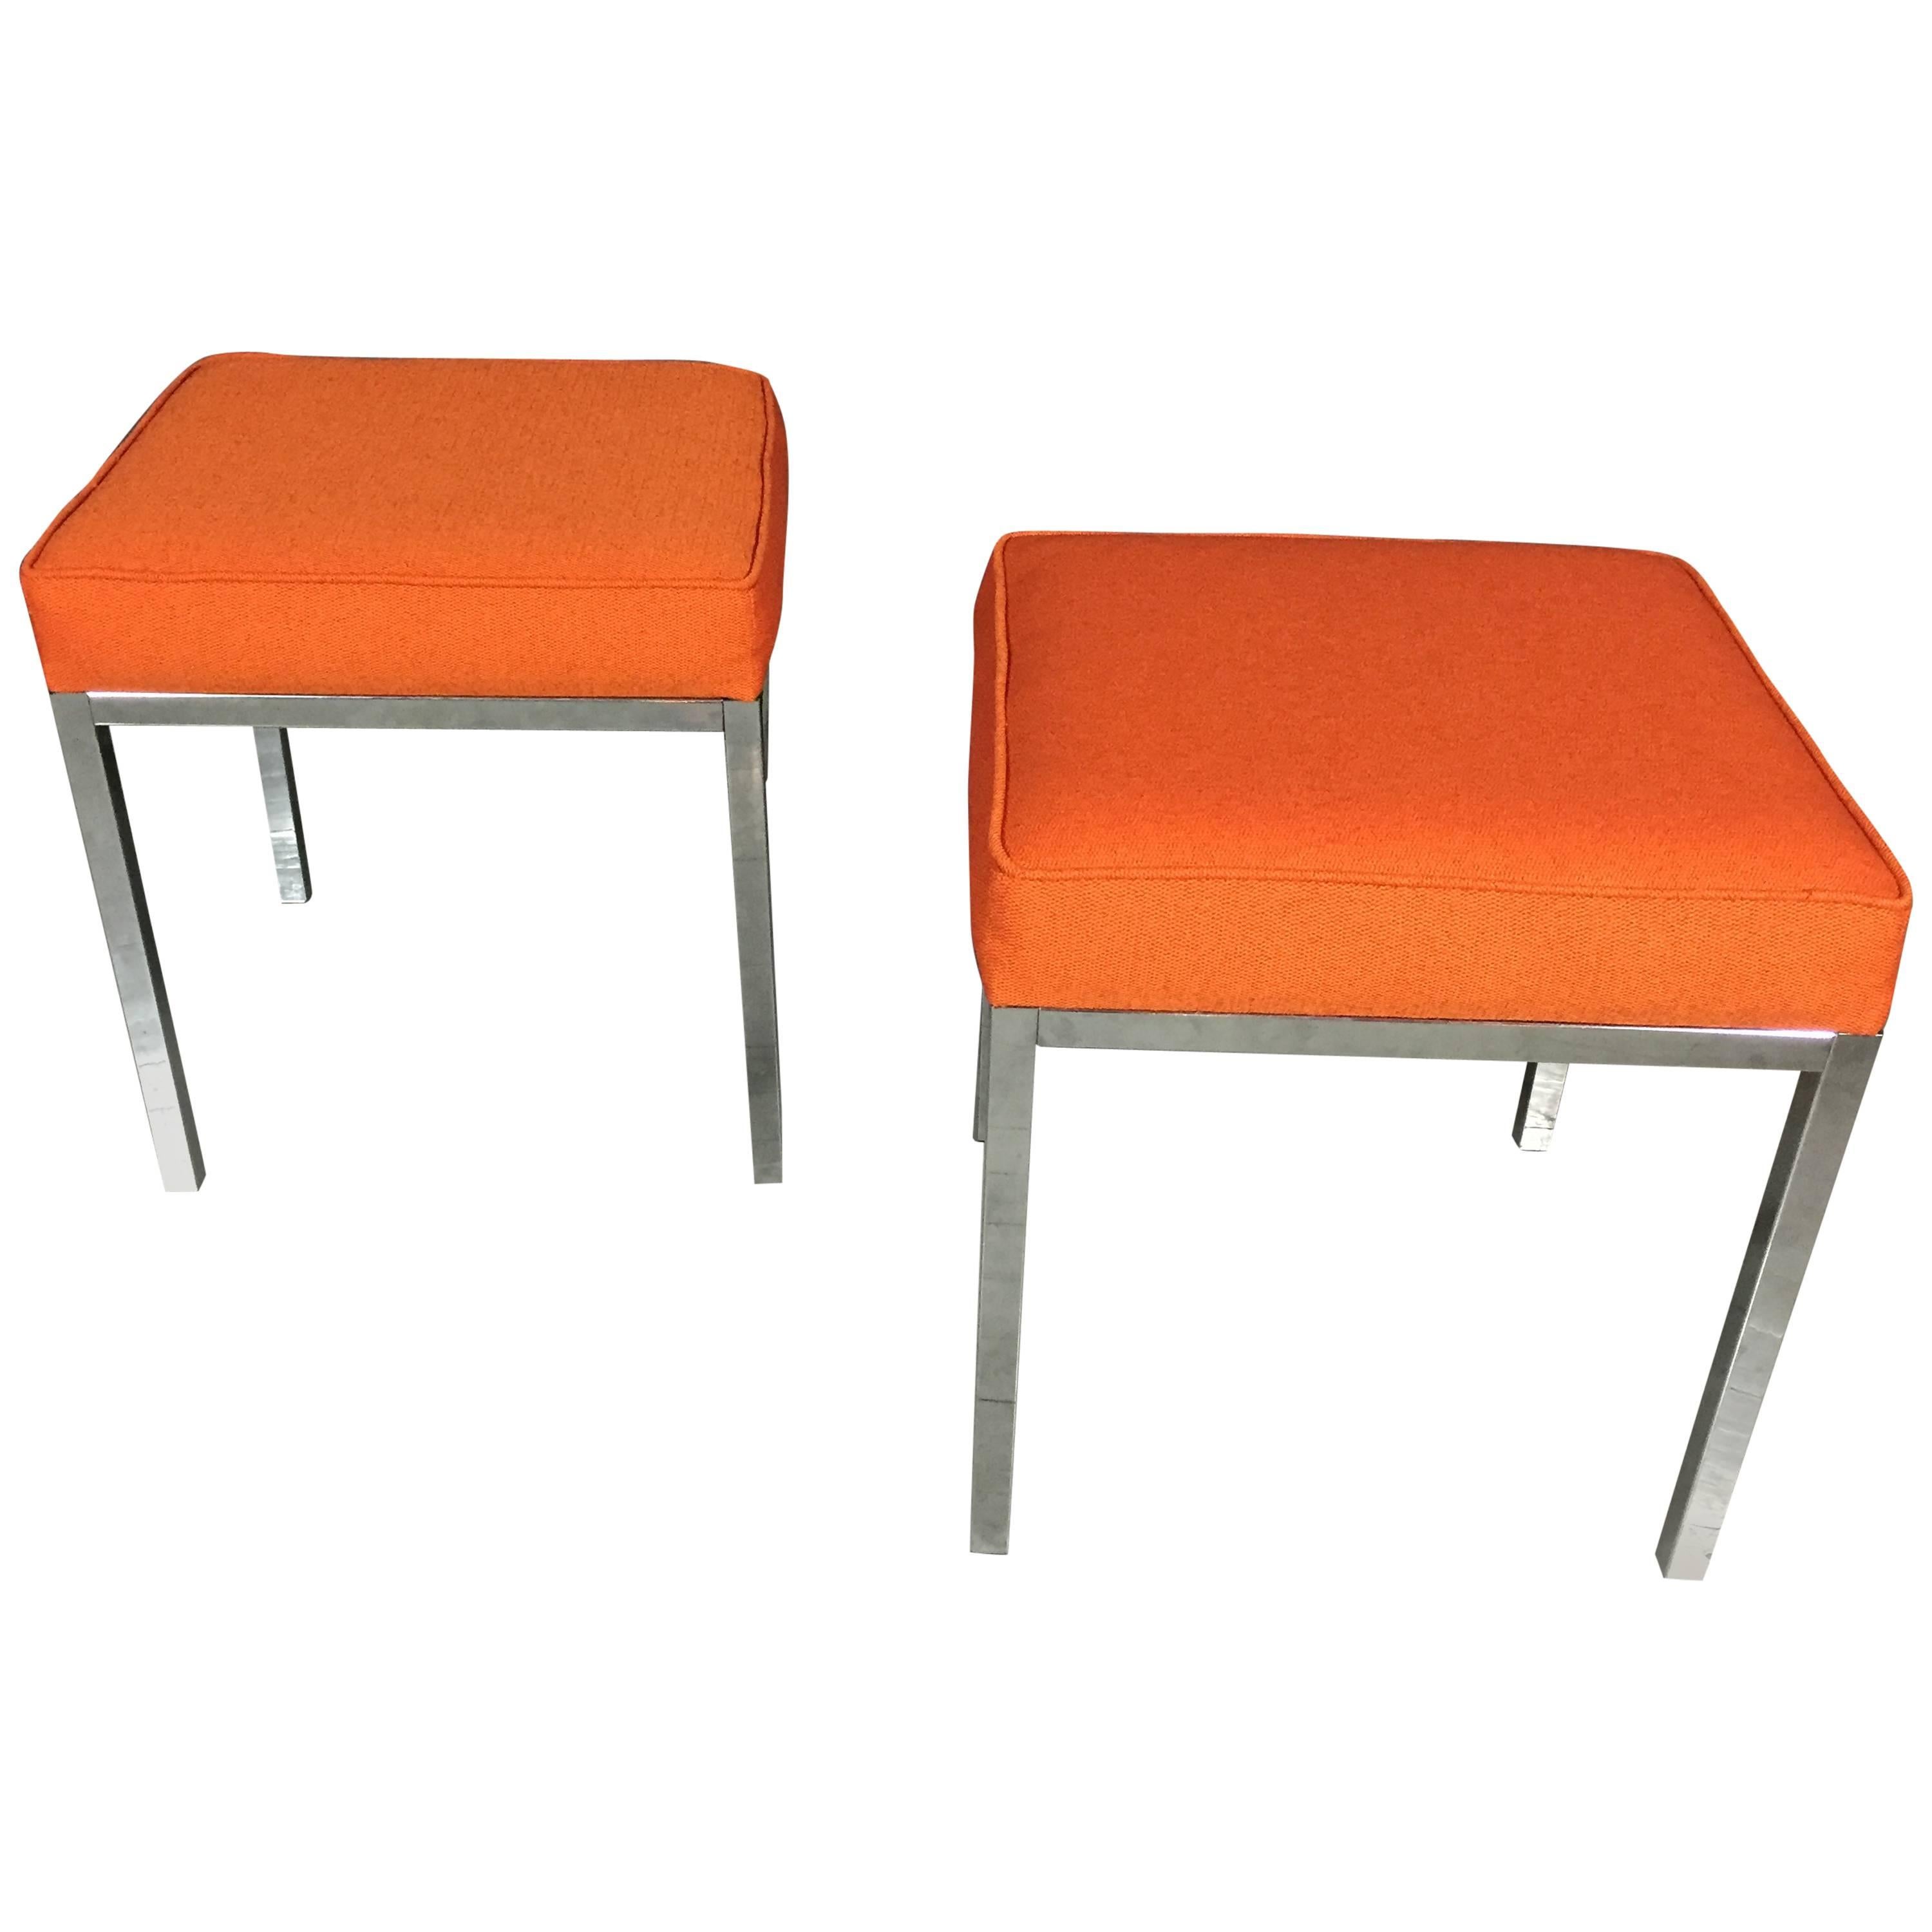 Pair of Chrome and Orange Wool Upholstered Benches, USA, 1970s